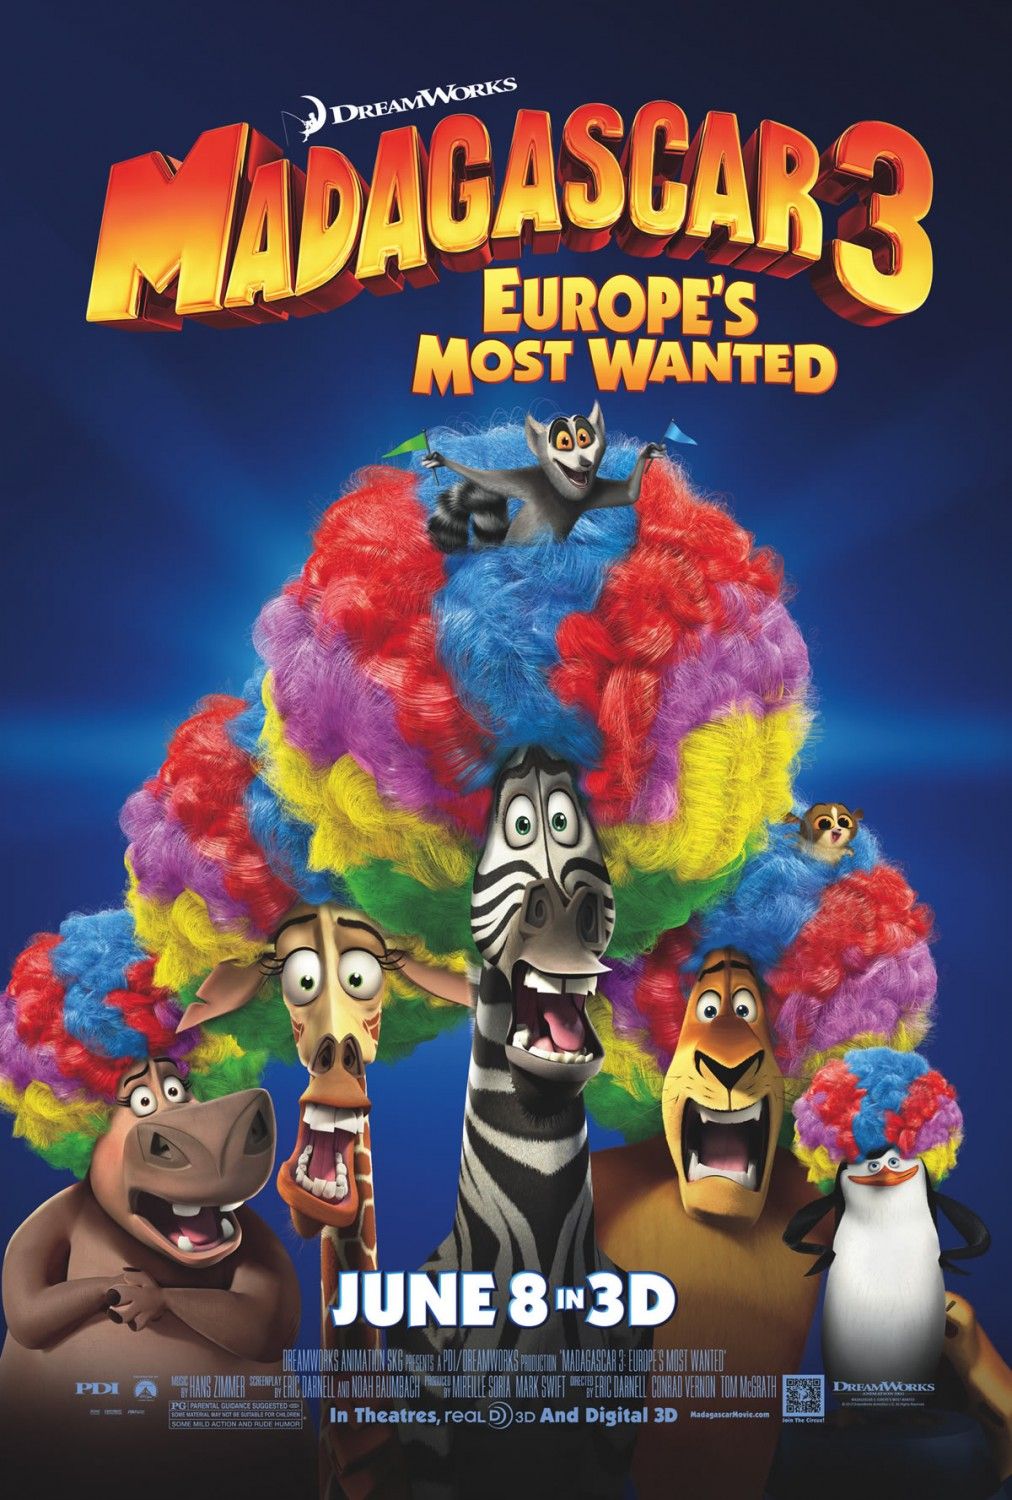 Madagascar 3 Poster Wallpaper Image for iOS 8